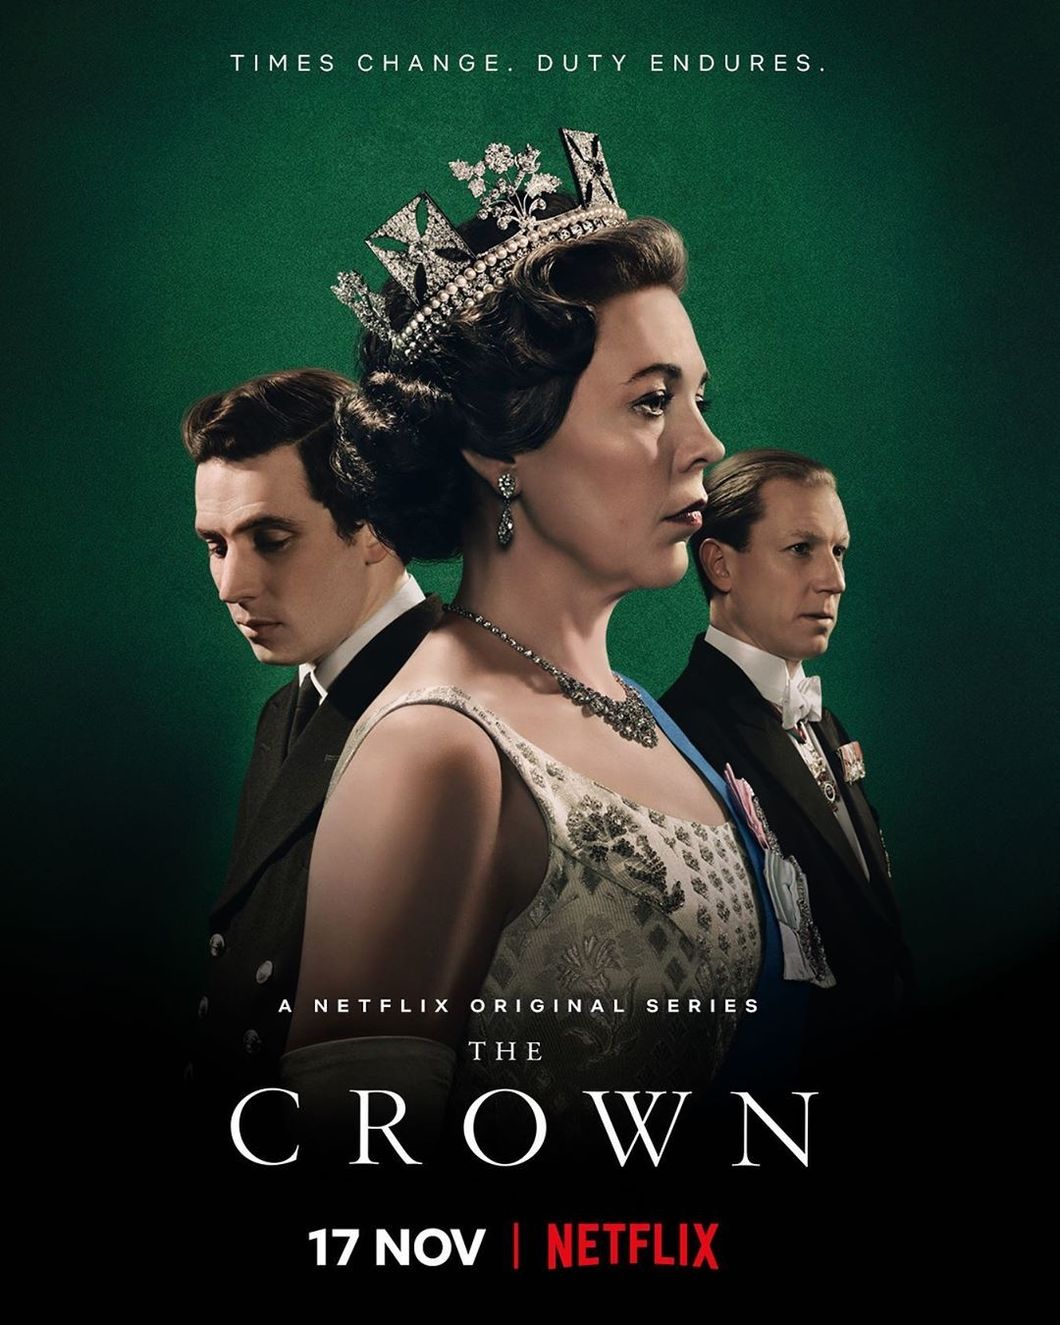 Season 3 Of 'The Crown' Was Just Released, And I'm Not Impressed